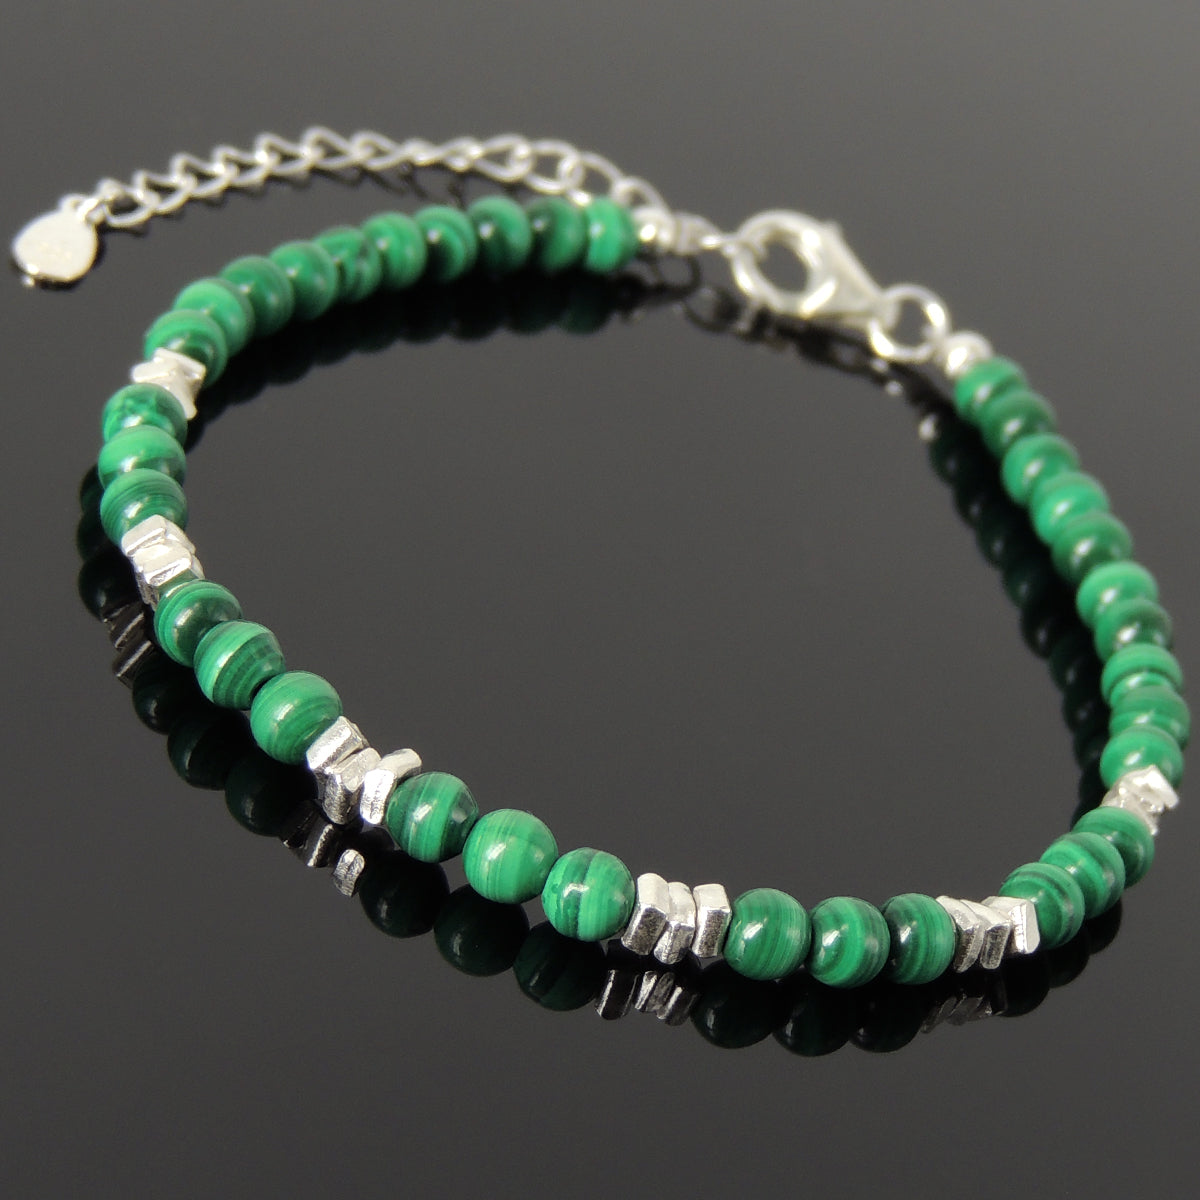 4mm Malachite Healing Gemstone Bracelet with S925 Sterling Silver Nugget Beads, Chain, & Clasp - Handmade by Gem & Silver BR1269